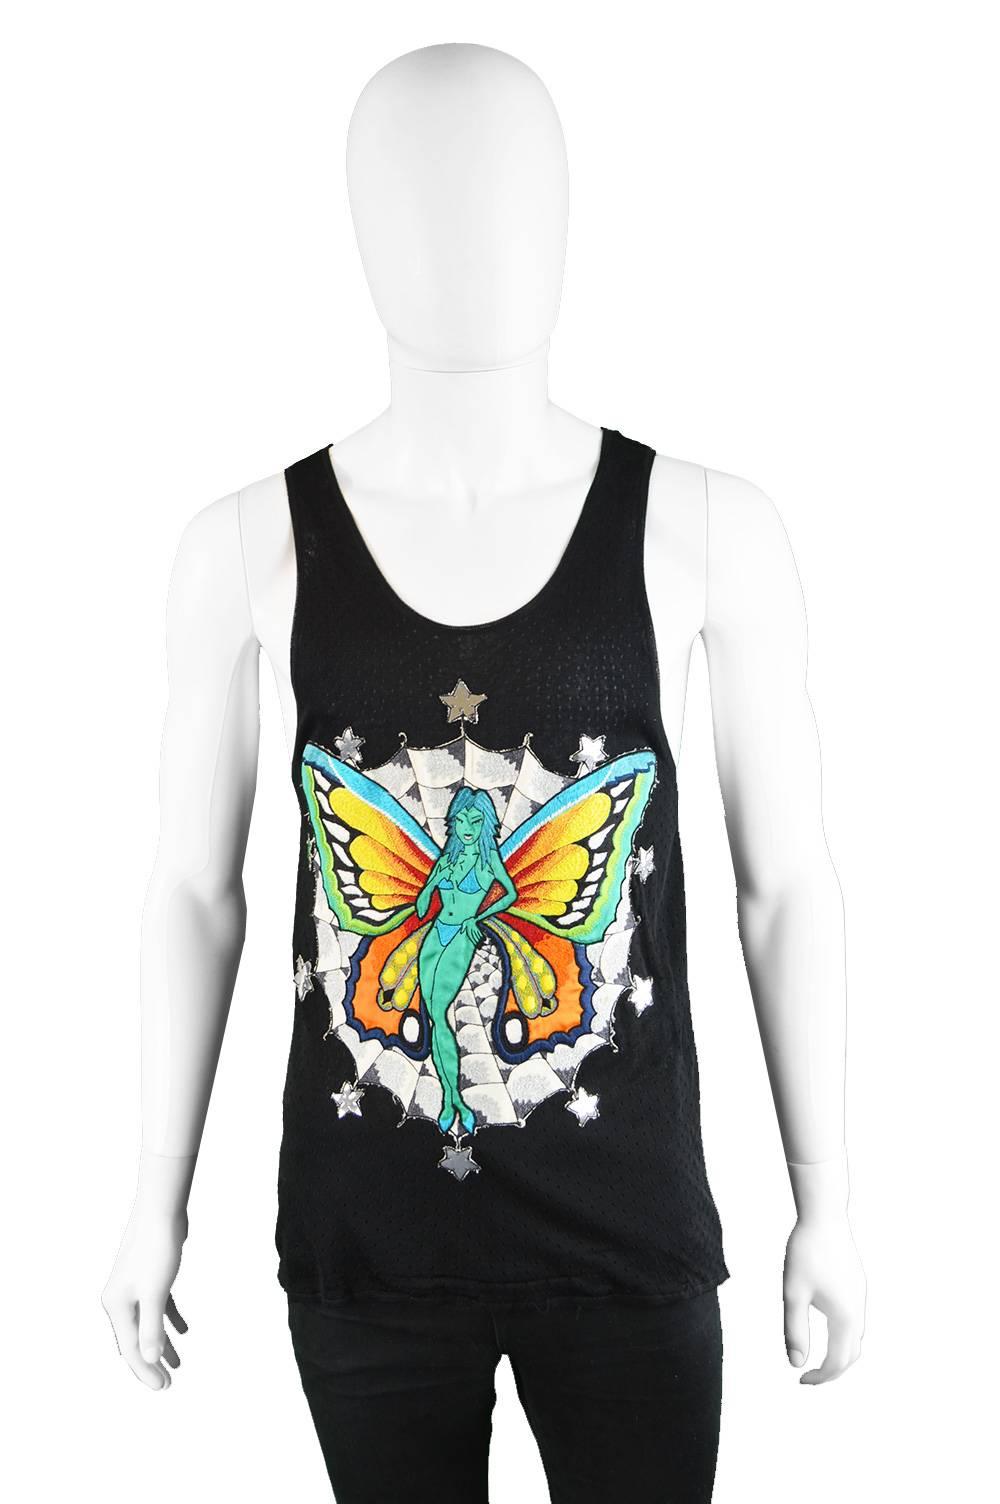 Black Tom Ford for Gucci Mens Rayon Knit Tank Top with Embroidered Fairy, S/S 2002  For Sale